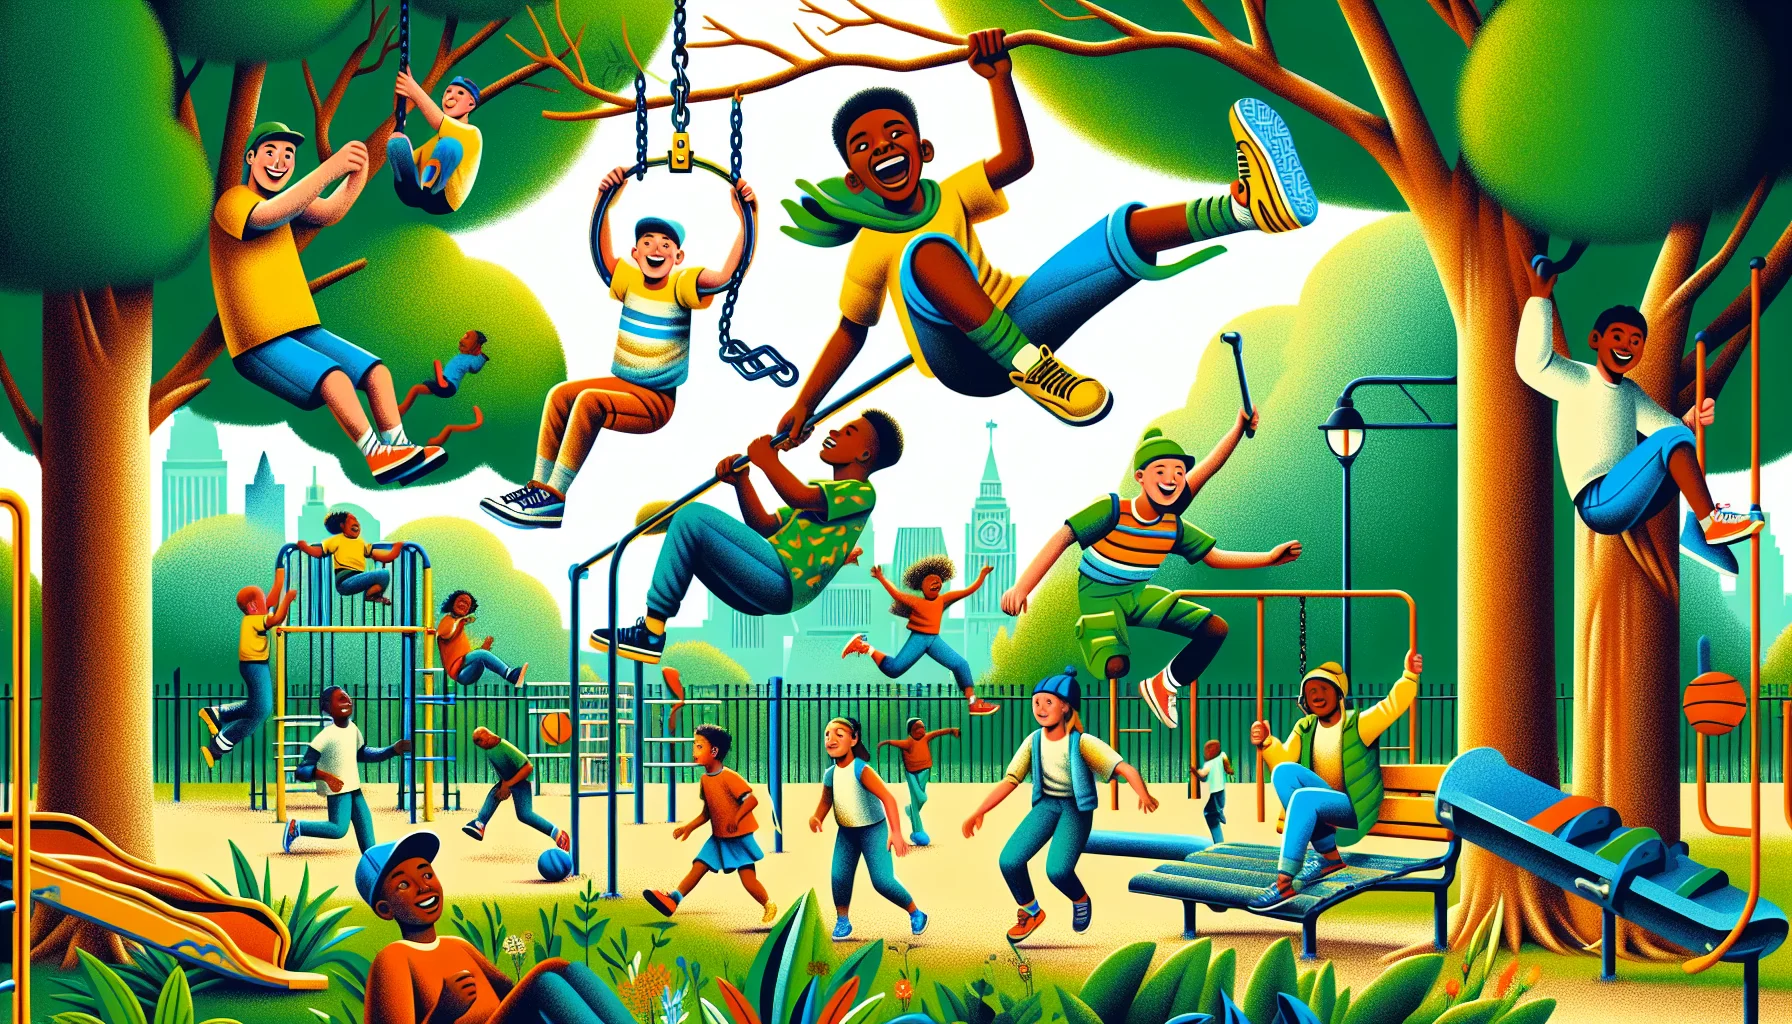 Generate a picture that depicts a humorous scene in a park, where children of different descents - Caucasian, South Asian, Black, Hispanic and Middle-Eastern - are enthusiastically engaging in parkour activities. They could be hanging from tree branches, swinging from park equipment, jumping over fences, rolling on the ground etc. Their lively expressions and exaggerated actions should create laughter and inspiration, hence encouraging others to participate in physical activities for health and entertainment. The overall vibe should be fun-filled and inviting with bright vibrant colors.